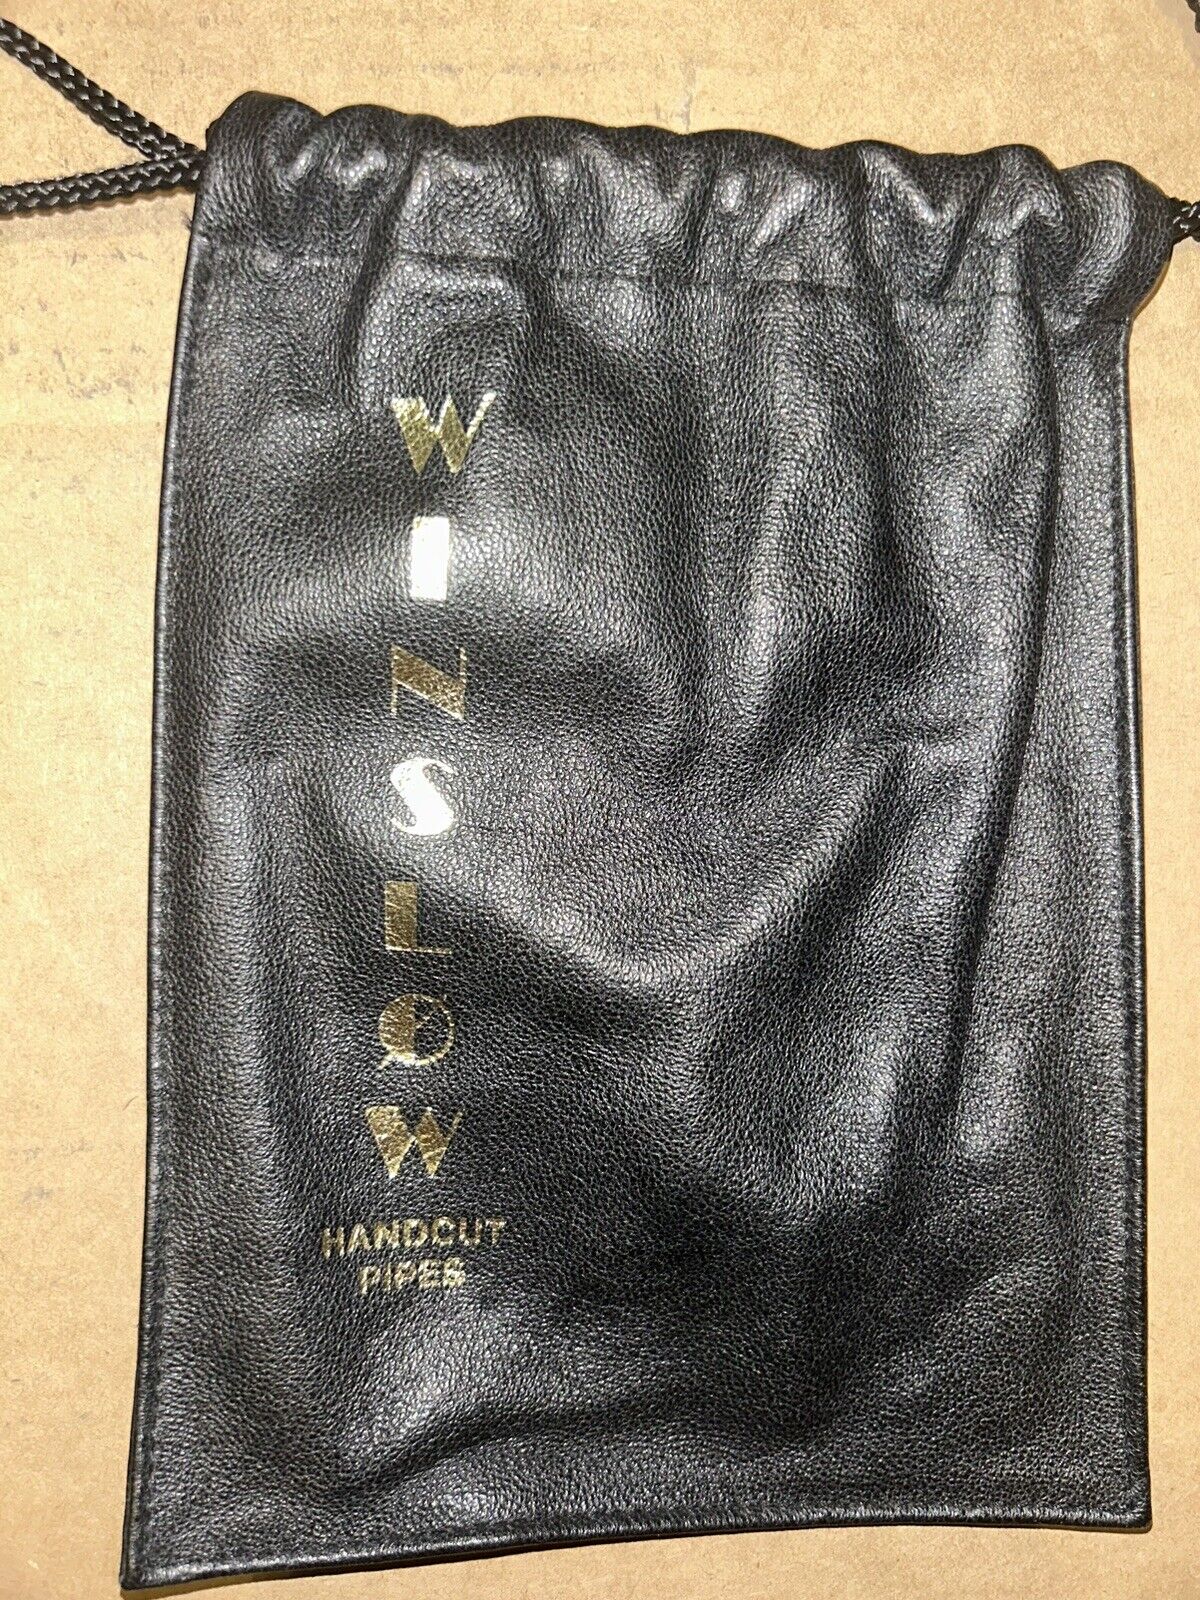 Winslow pipe bag Gold Letters Hand cut Pipe Accessories Bag w/ Drawstrings